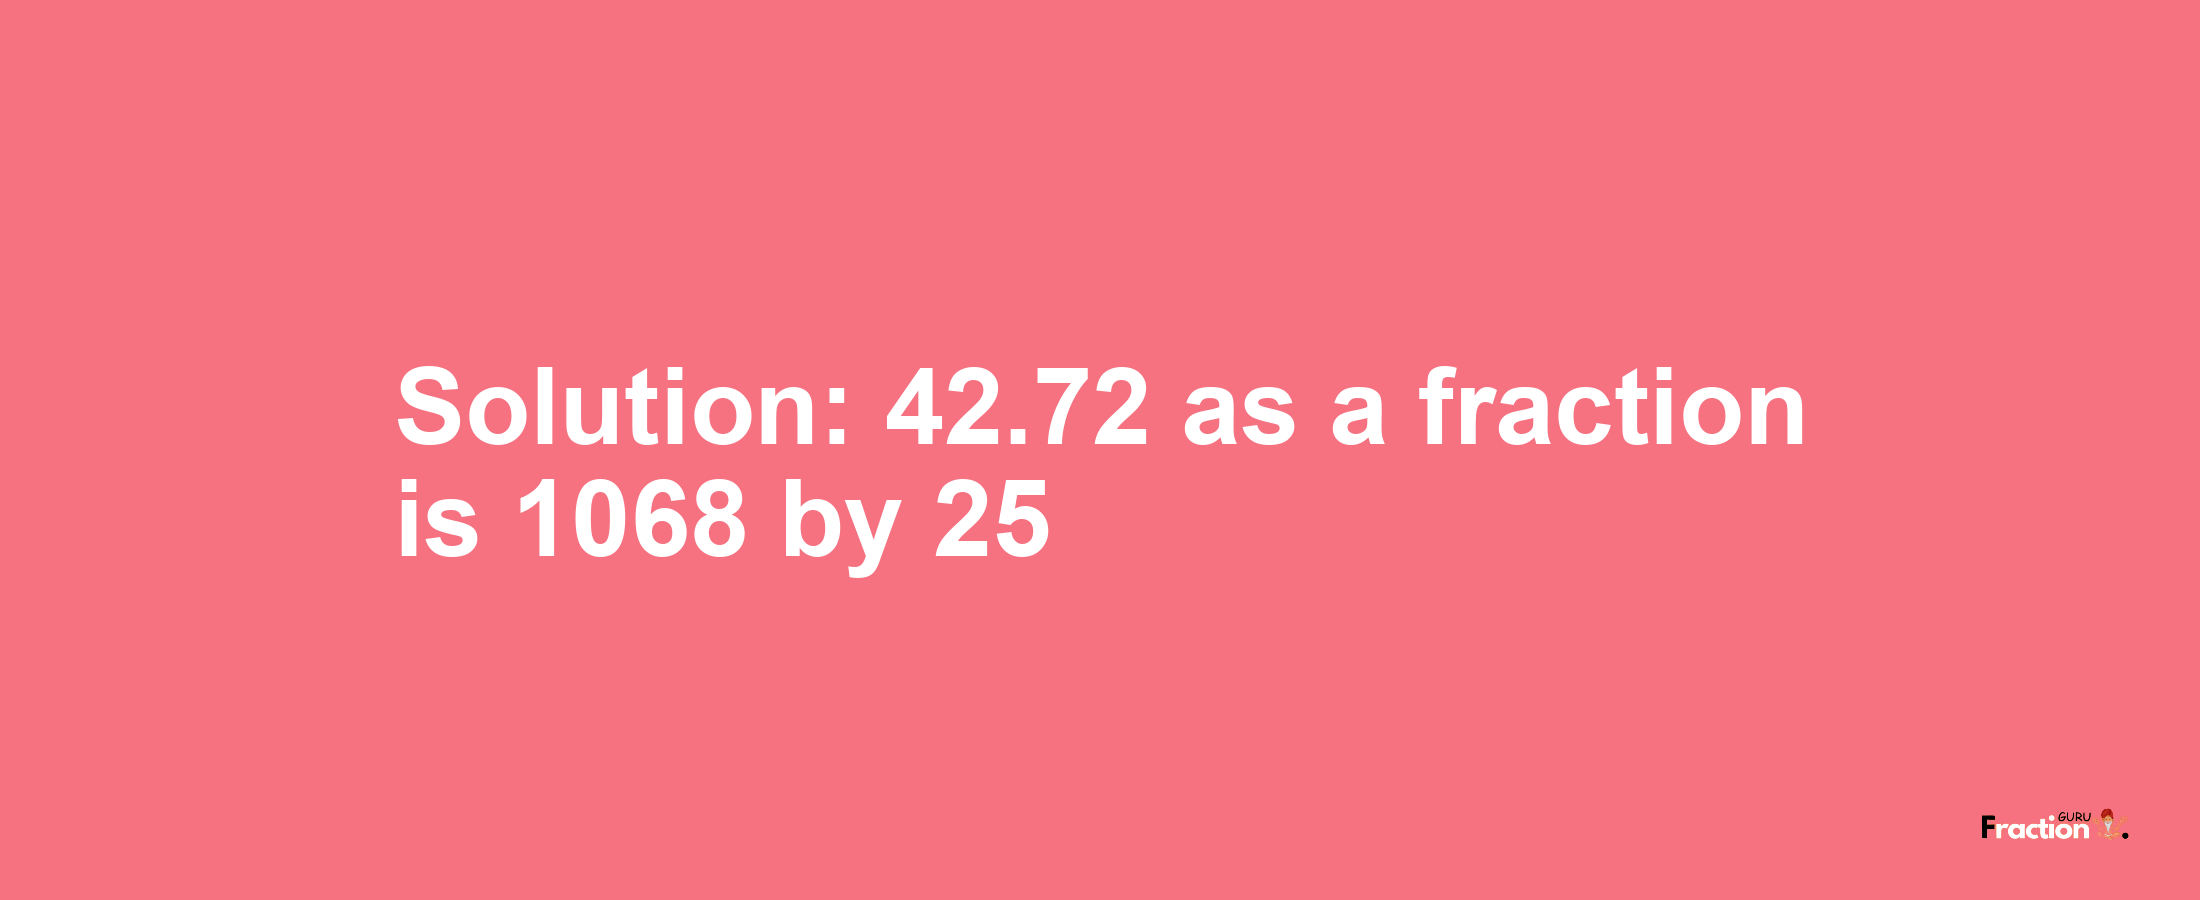 Solution:42.72 as a fraction is 1068/25